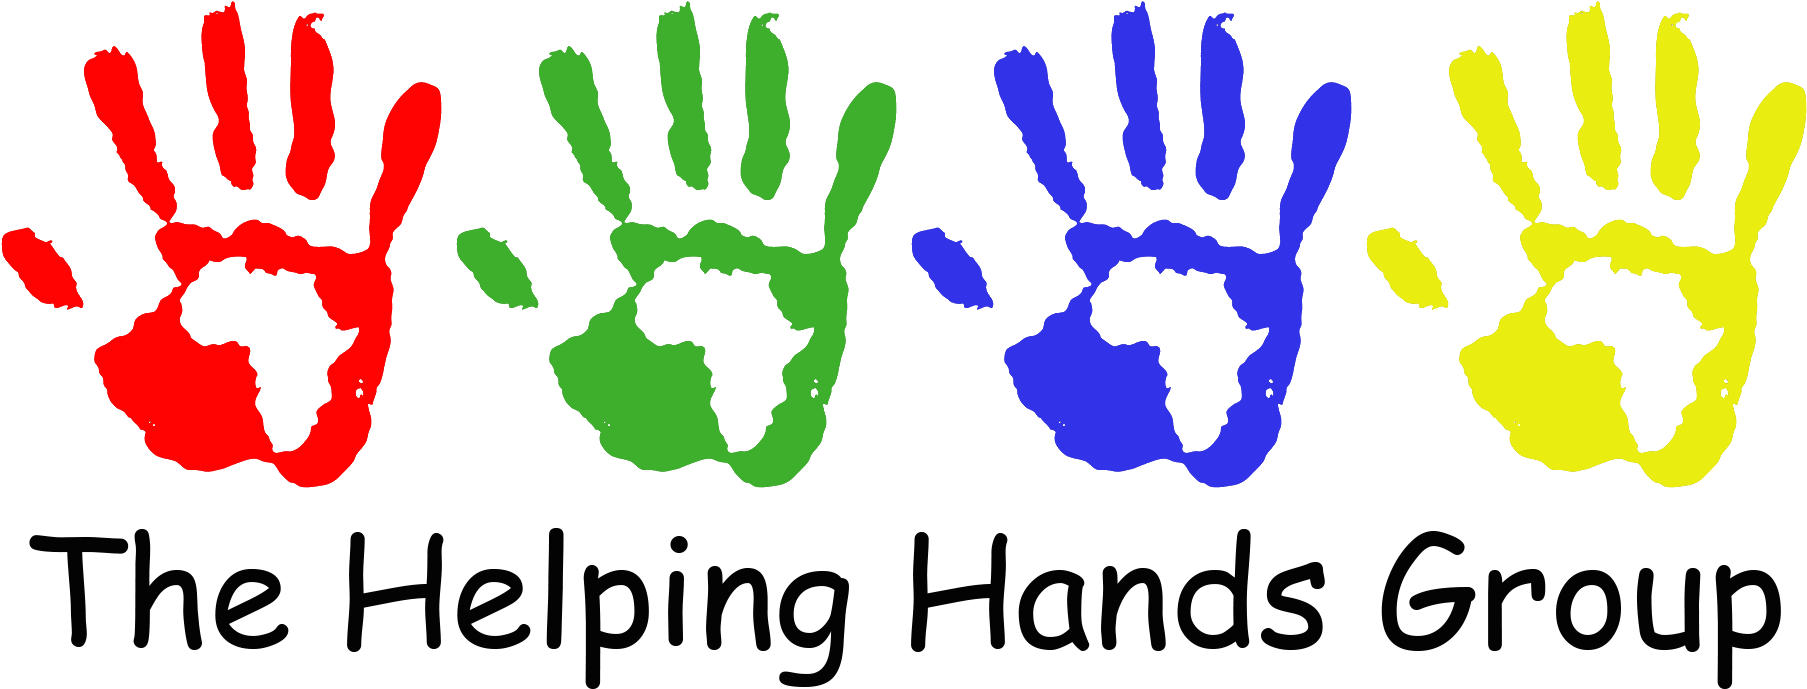 Primary Colors Africa Png - Colorful Helping Hands Png Clipart - Large ...